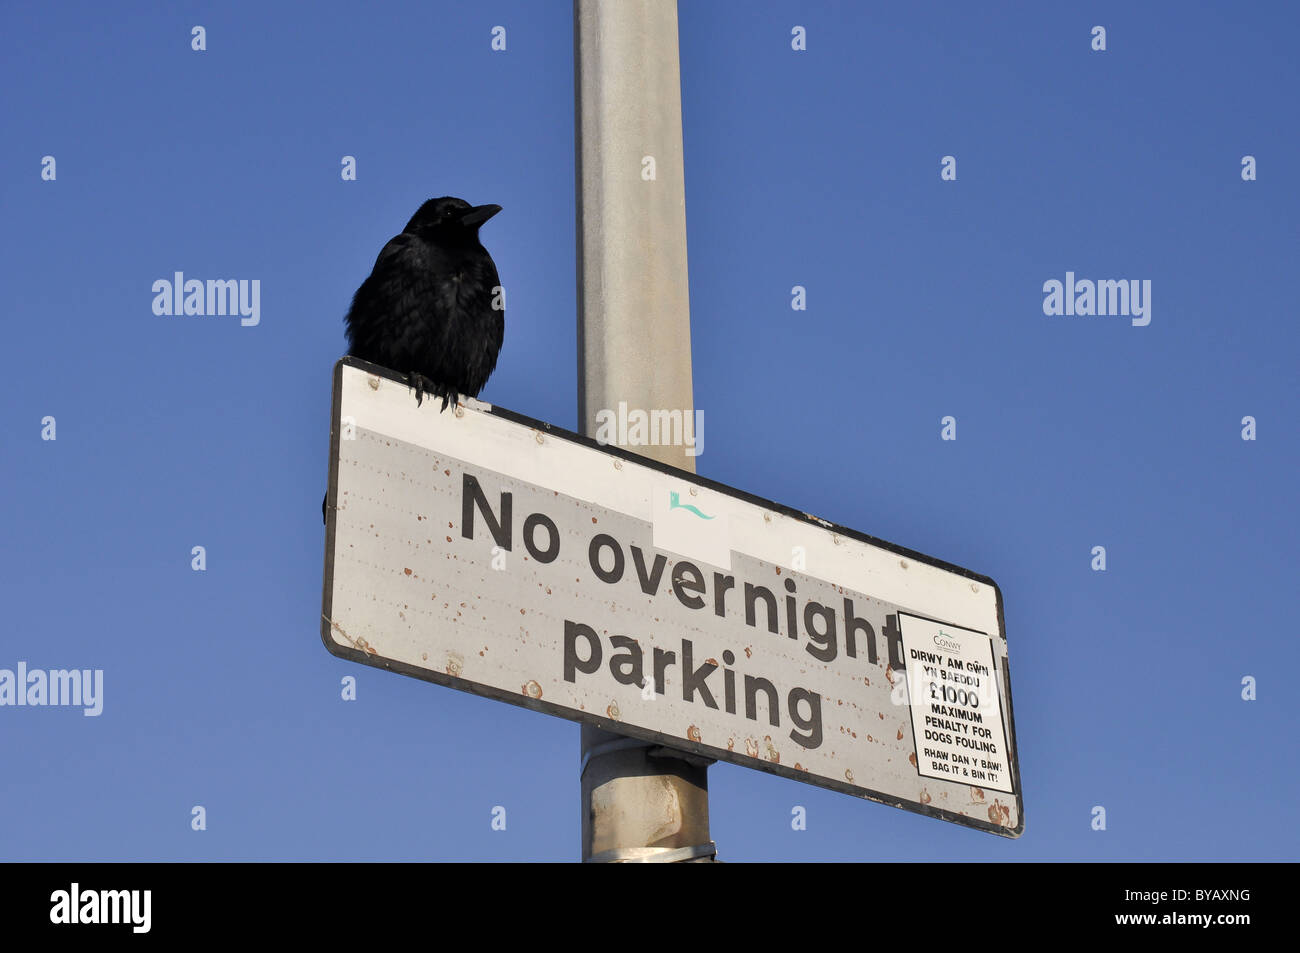 No overnight parking sign Stock Photo